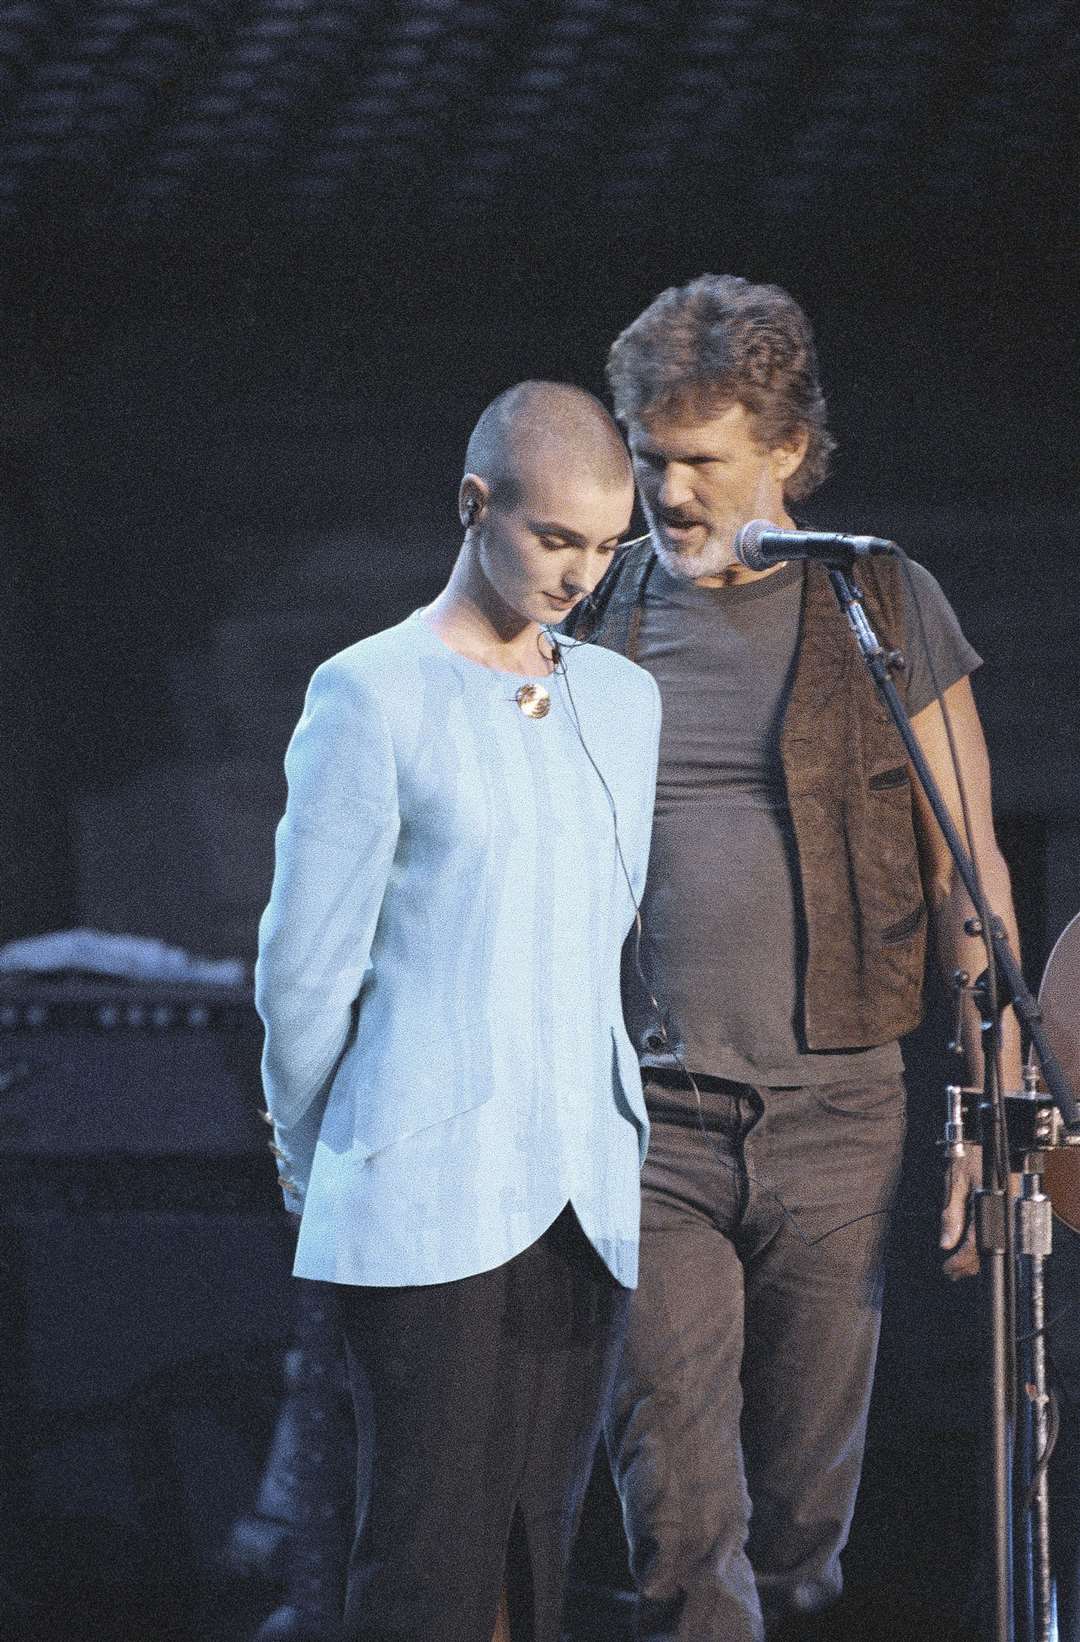 Kris Kristofferson comforts Sinead O’Connor after she was booed off stage Ron Frehm/AP)